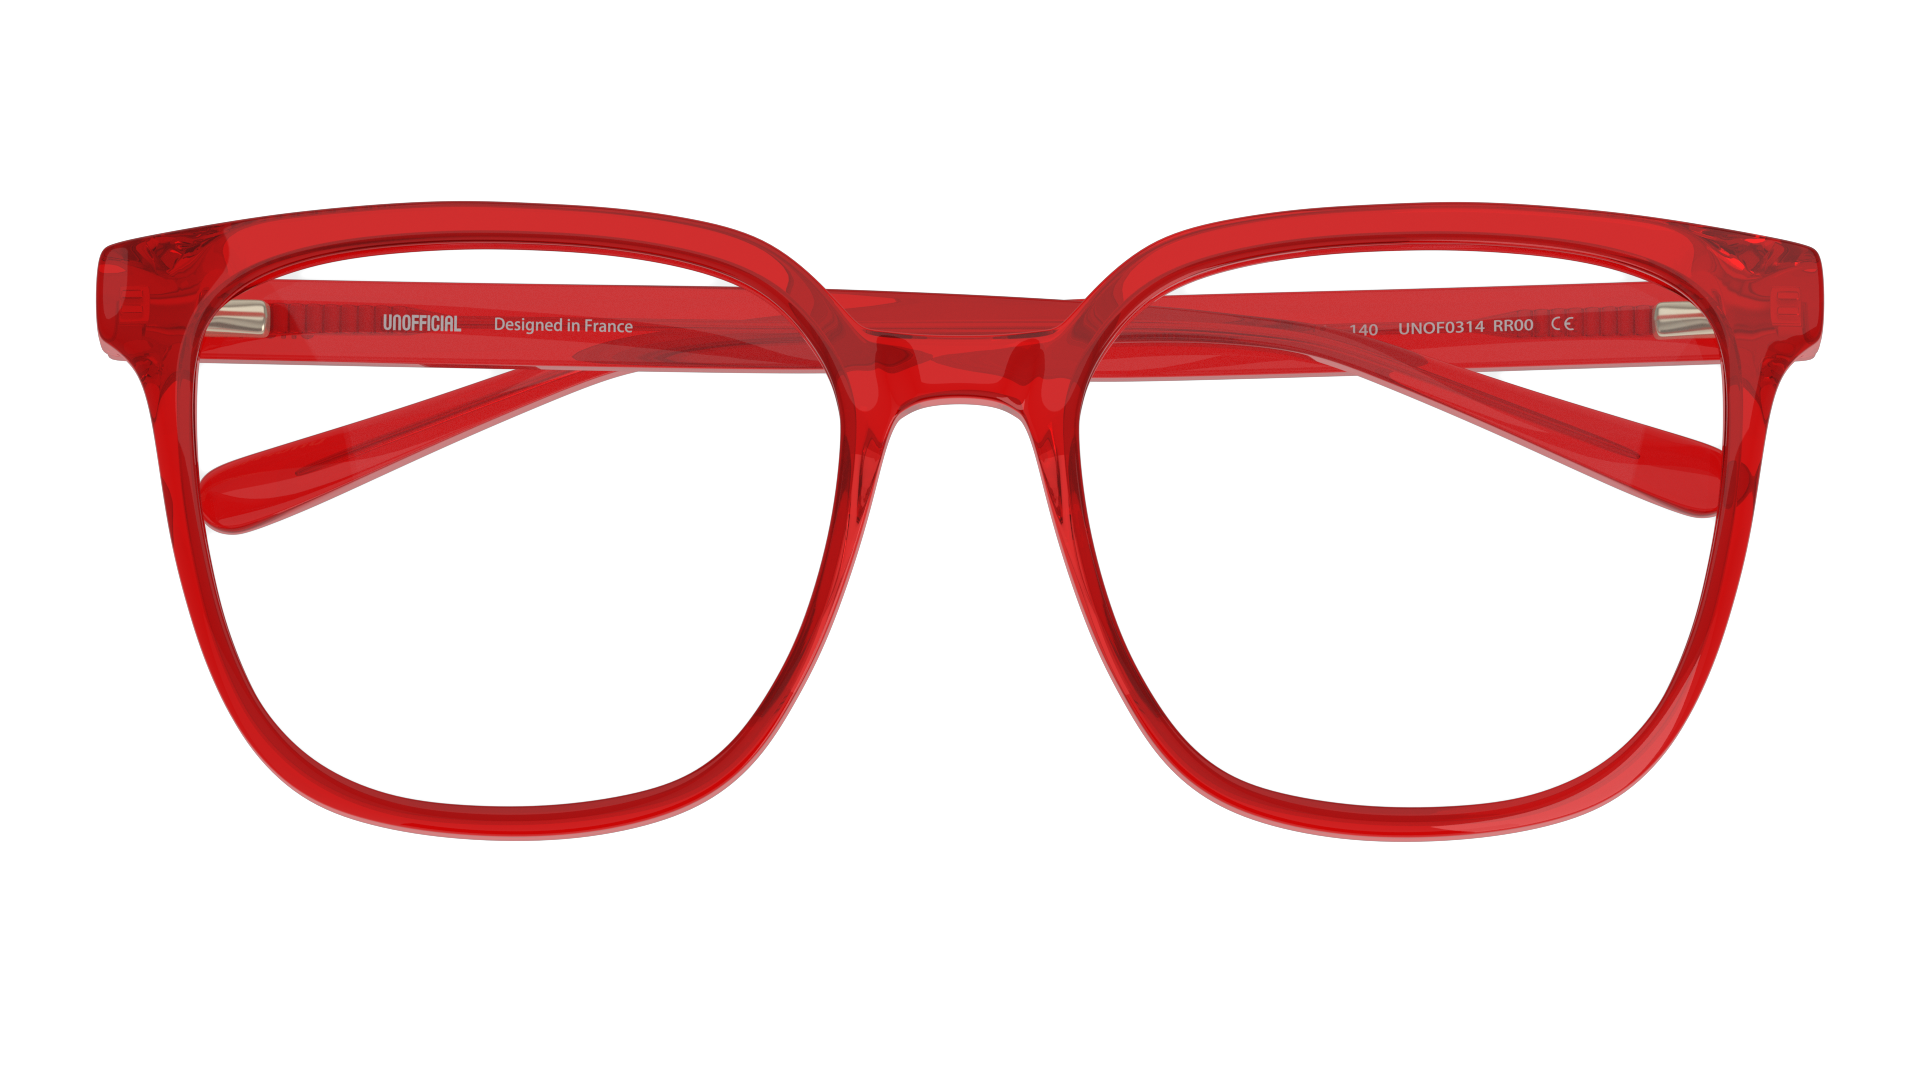 Folded Unofficial UNOF0314 (RR00) Glasses Transparent / Red